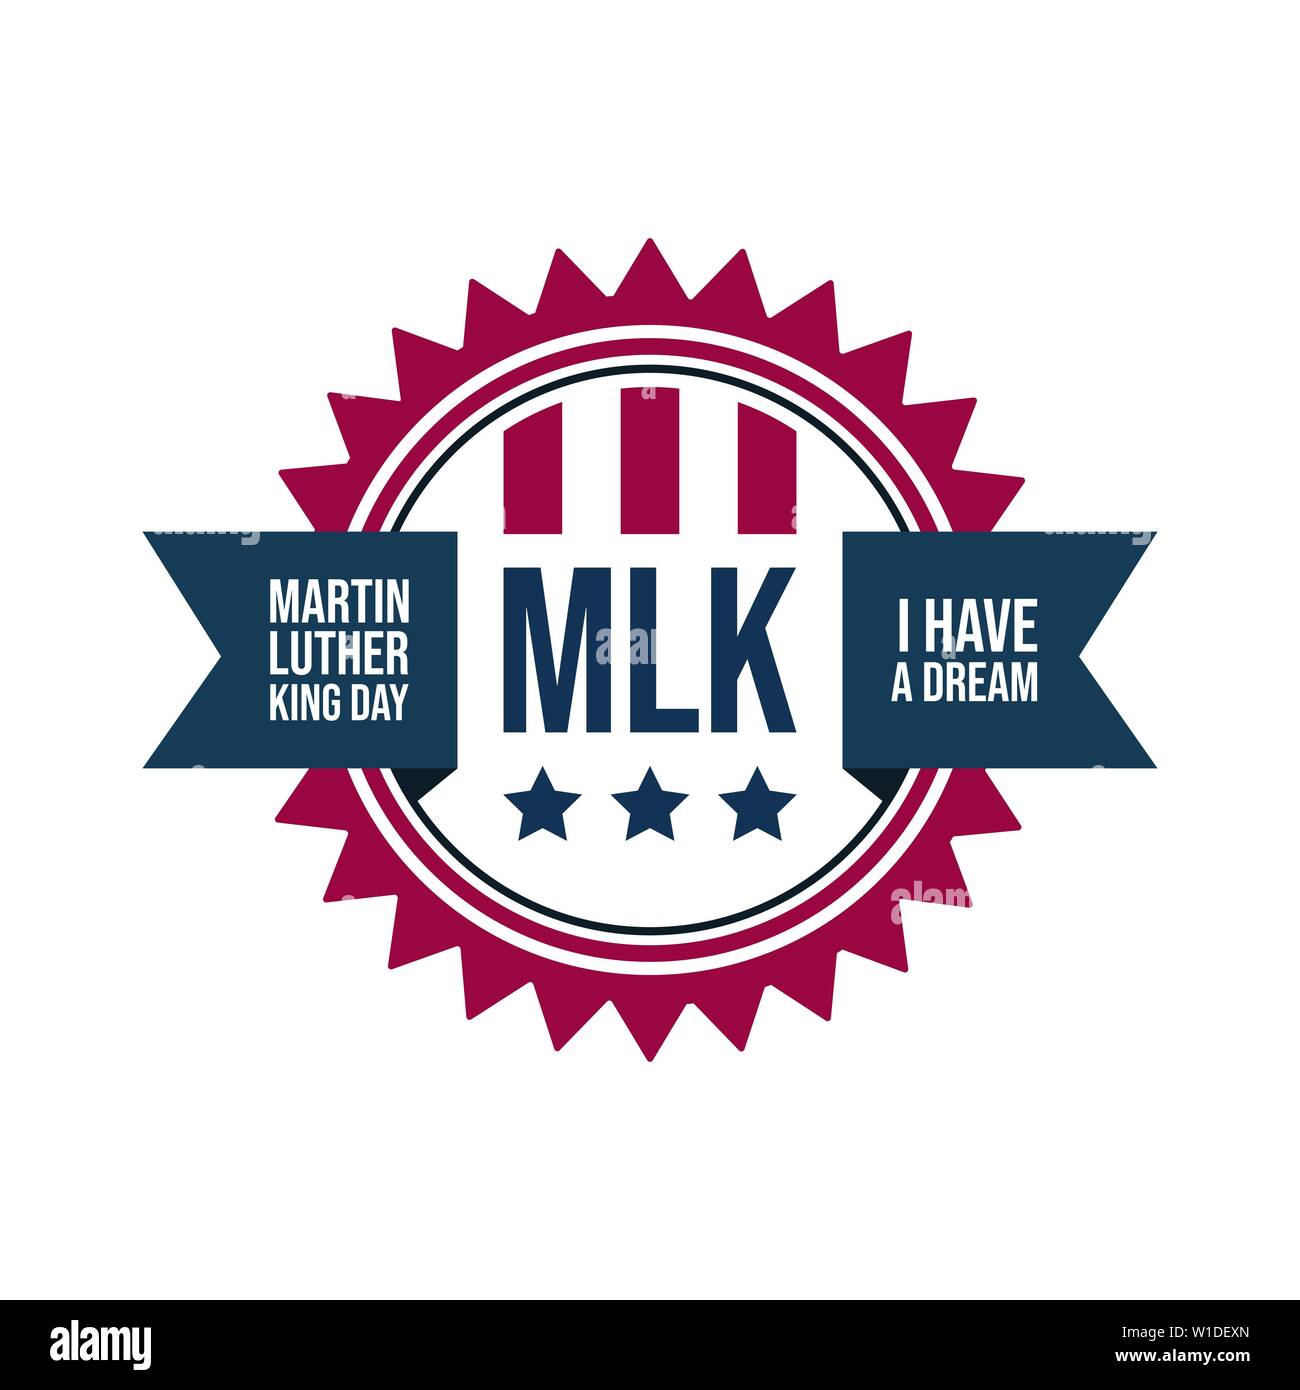 Martin luther king jr day label vector image Stock Vector